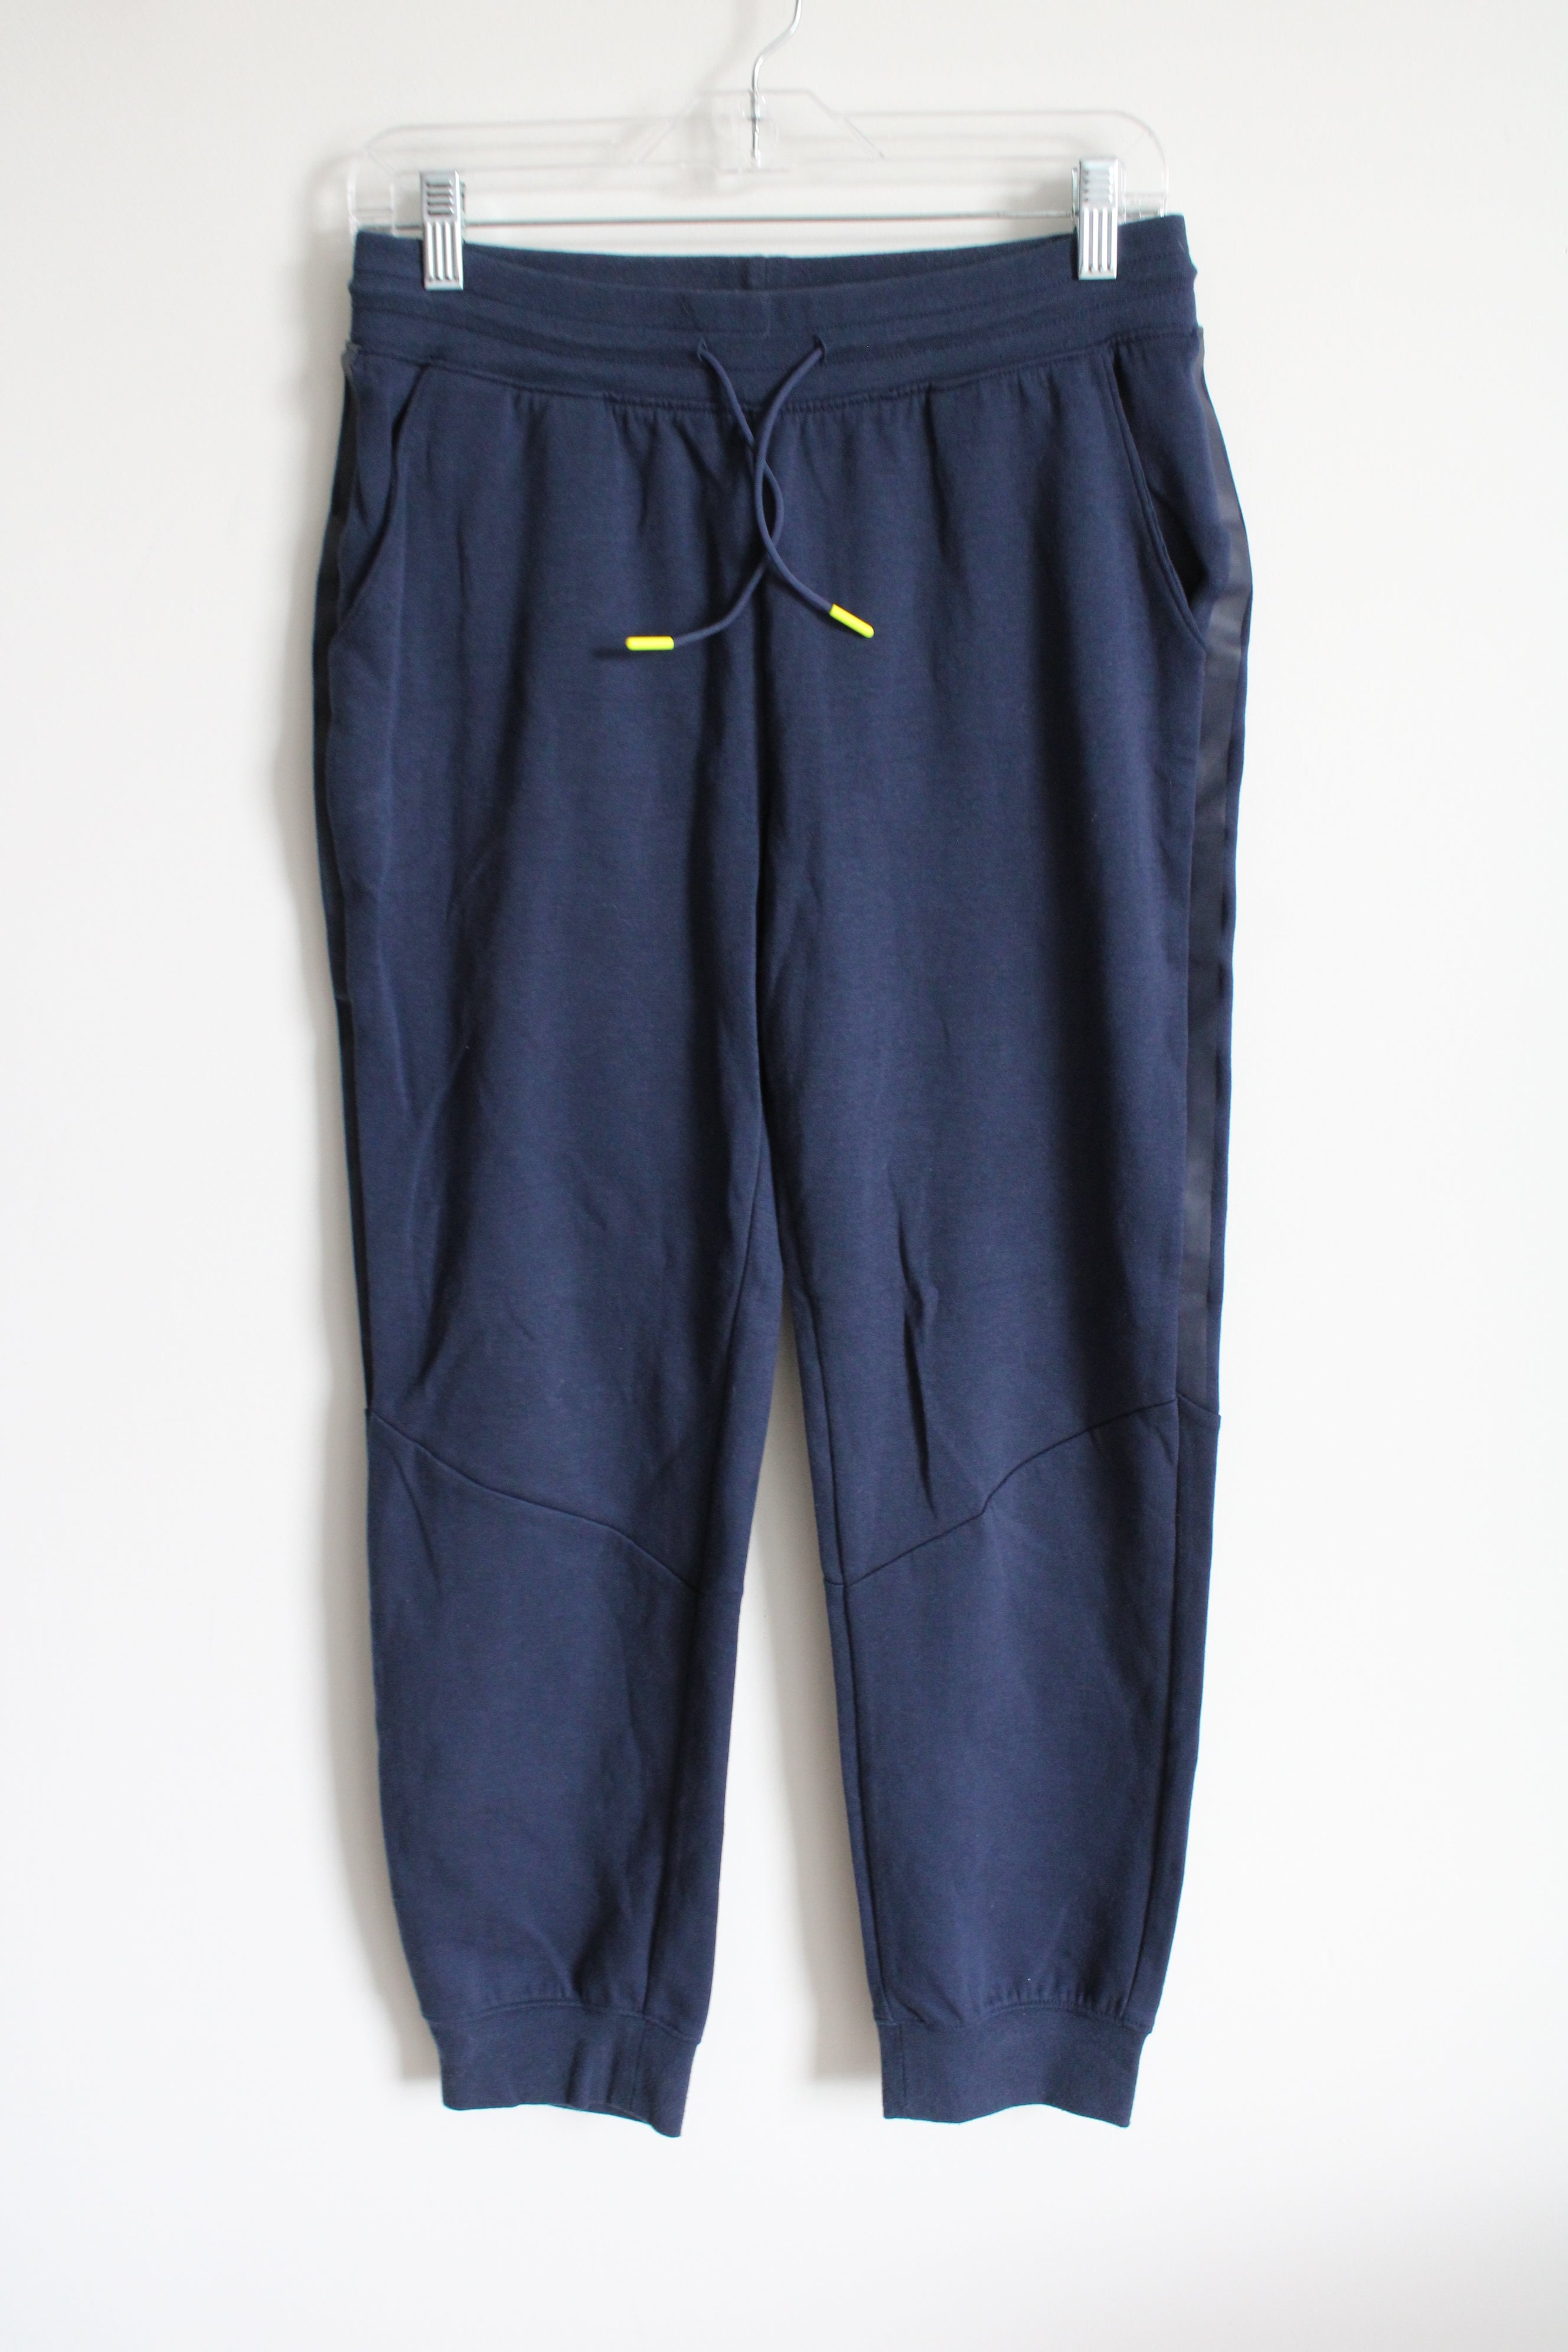 Athletic Works Navy Blue Jogger Pant | Youth XXL (18)